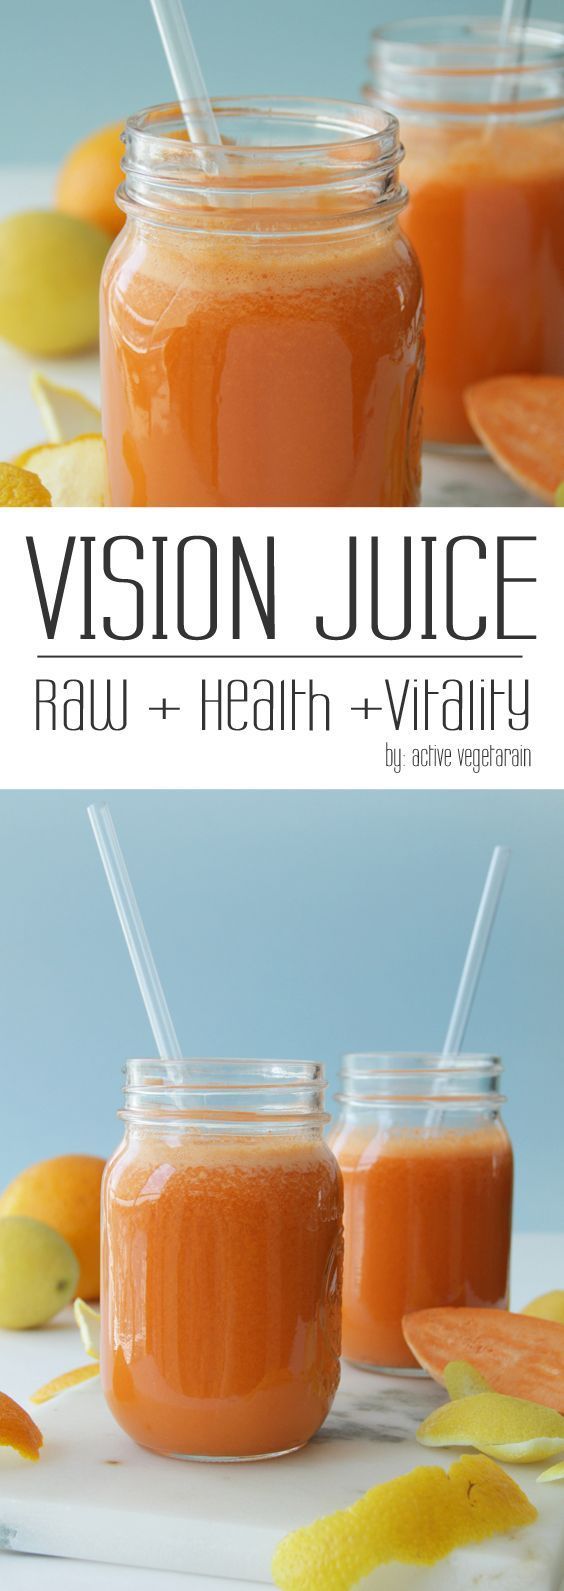 Juice Good for the Eyes - Recipes - Active Vegetarian -   16 diet Juice health ideas